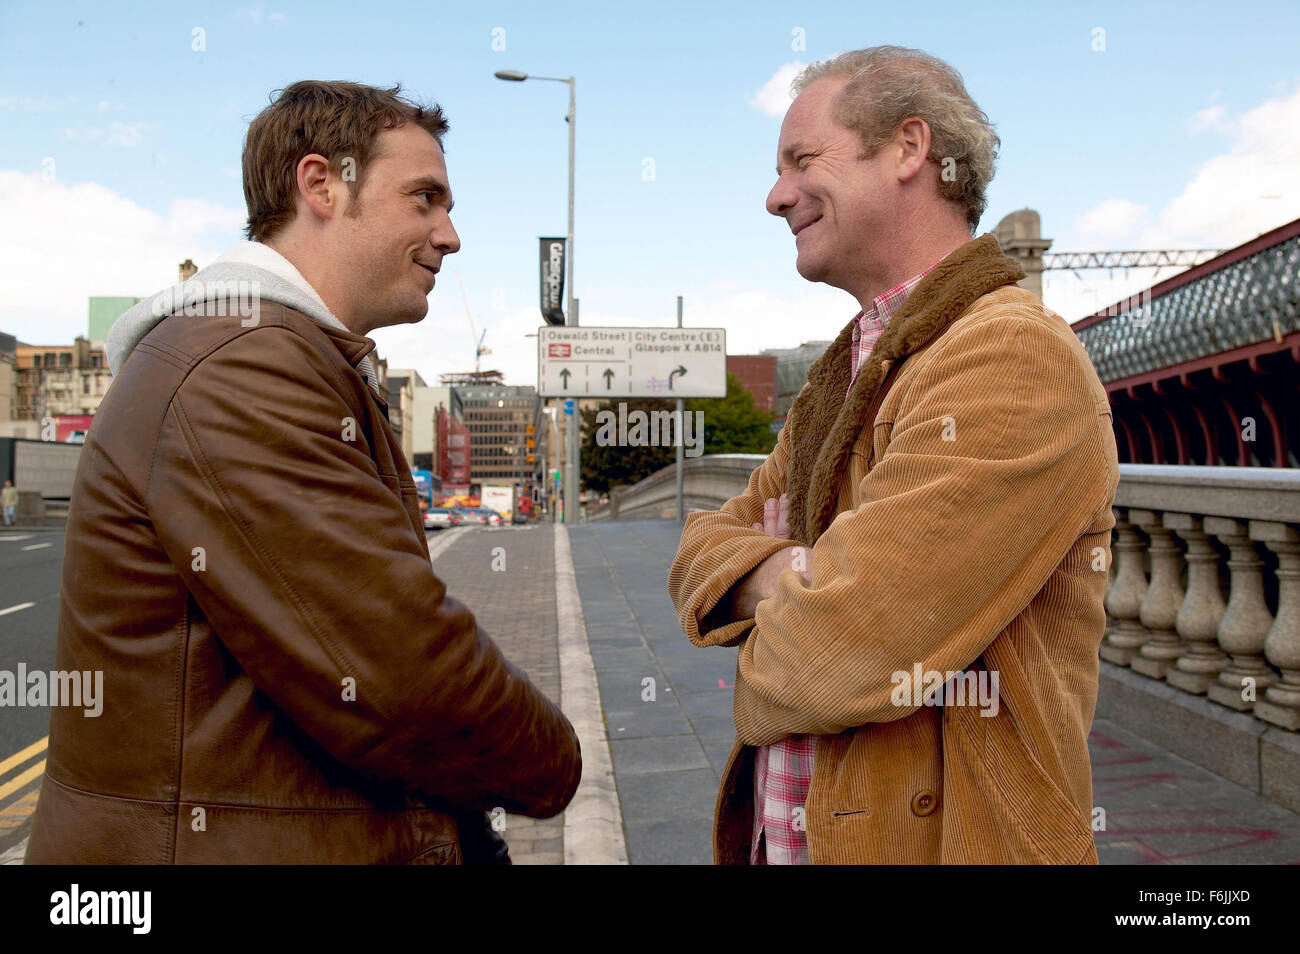 RELEASE DATE: January 2005. MOVIE TITLE: On a Clear Day. STUDIO: Baker Street. PLOT: Frank determines to salvage his self-esteem and tackle his demons by attempting the ultimate test of endurance - swimming the English Channel. PICTURED: JAMIE SIVES as Rob and PETER MULLAN as Frank. Stock Photo